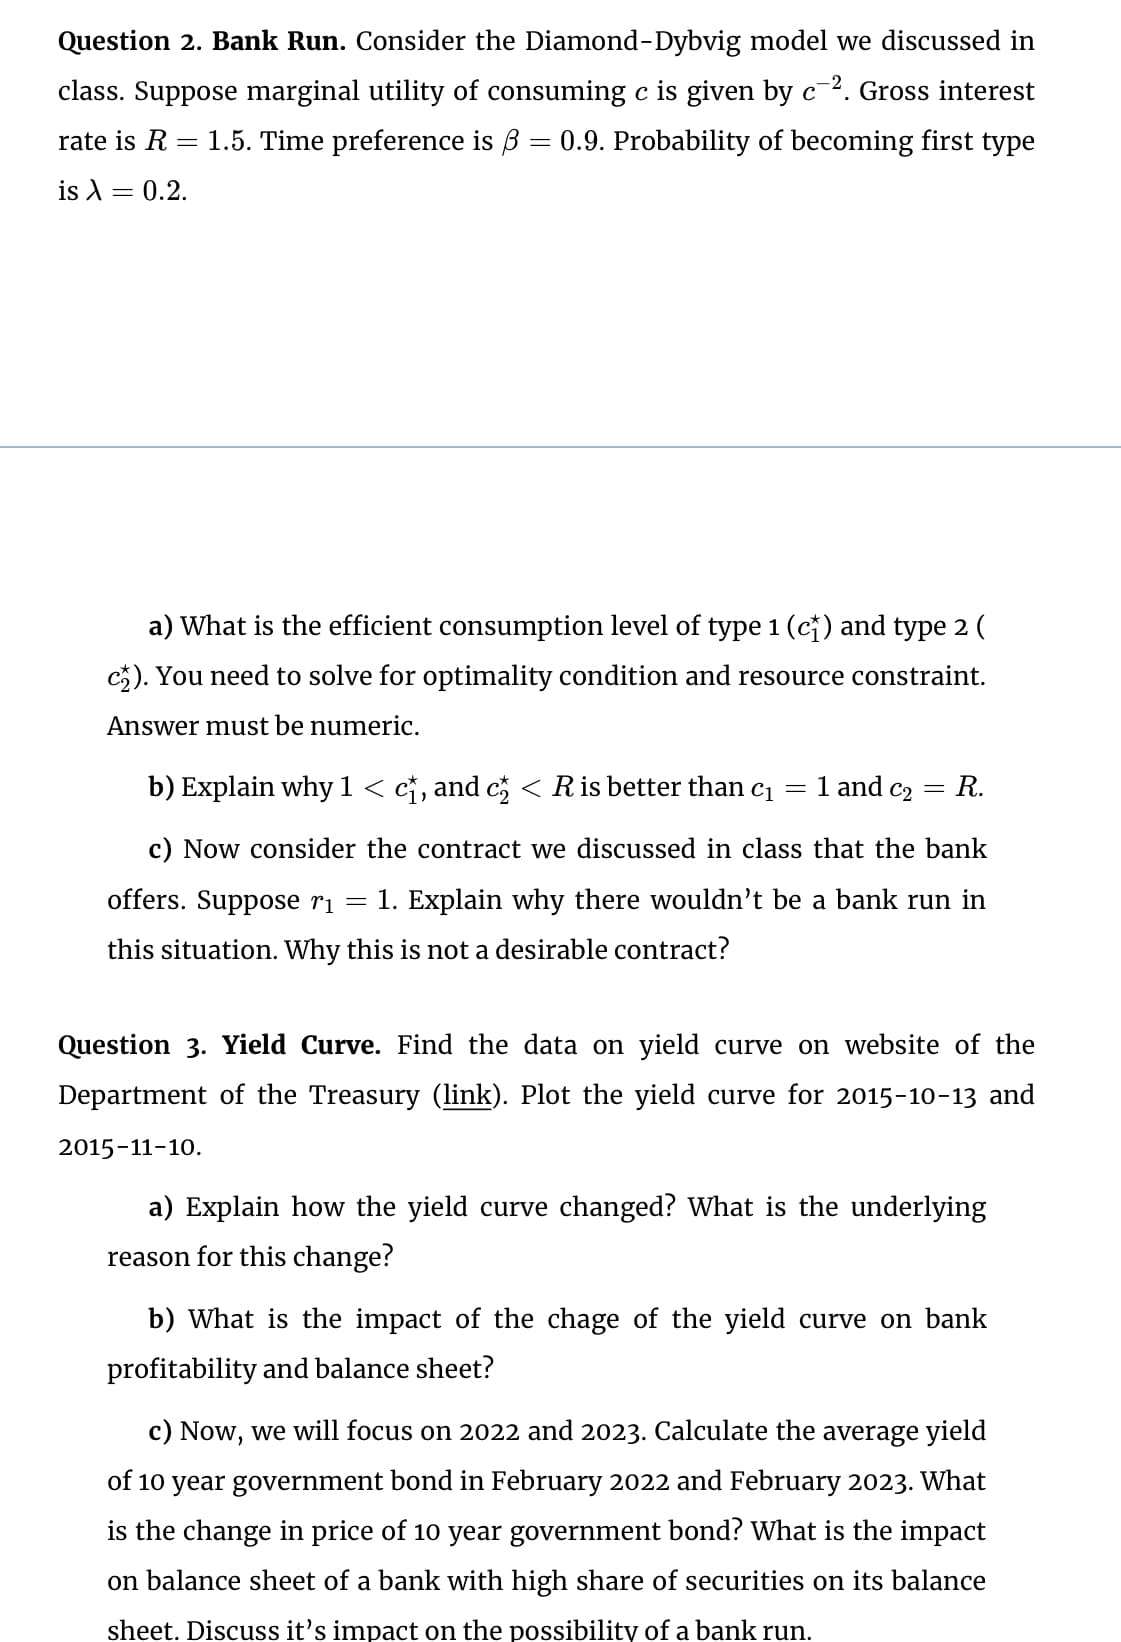 Question 2. Bank Run. Consider the Diamond-Dybvig model we discussed in
class. Suppose marginal utility of consuming c is given by c². Gross interest
rate is R = 1.5. Time preference is ẞ = 0.9. Probability of becoming first type
is λ = 0.2.
a) What is the efficient consumption level of type 1 (c†) and type 2 (
c). You need to solve for optimality condition and resource constraint.
Answer must be numeric.
b) Explain why 1 < c†, and c½ < R is better than cı
=
1 and C2
=
R.
c) Now consider the contract we discussed in class that the bank
offers. Suppose ri
-
1. Explain why there wouldn't be a bank run in
this situation. Why this is not a desirable contract?
Question 3. Yield Curve. Find the data on yield curve on website of the
Department of the Treasury (link). Plot the yield curve for 2015-10-13 and
2015-11-10.
a) Explain how the yield curve changed? What is the underlying
reason for this change?
b) What is the impact of the chage of the yield curve on bank
profitability and balance sheet?
c) Now, we will focus on 2022 and 2023. Calculate the average yield
of 10 year government bond in February 2022 and February 2023. What
is the change in price of 10 year government bond? What is the impact
on balance sheet of a bank with high share of securities on its balance
sheet. Discuss it's impact on the possibility of a bank run.